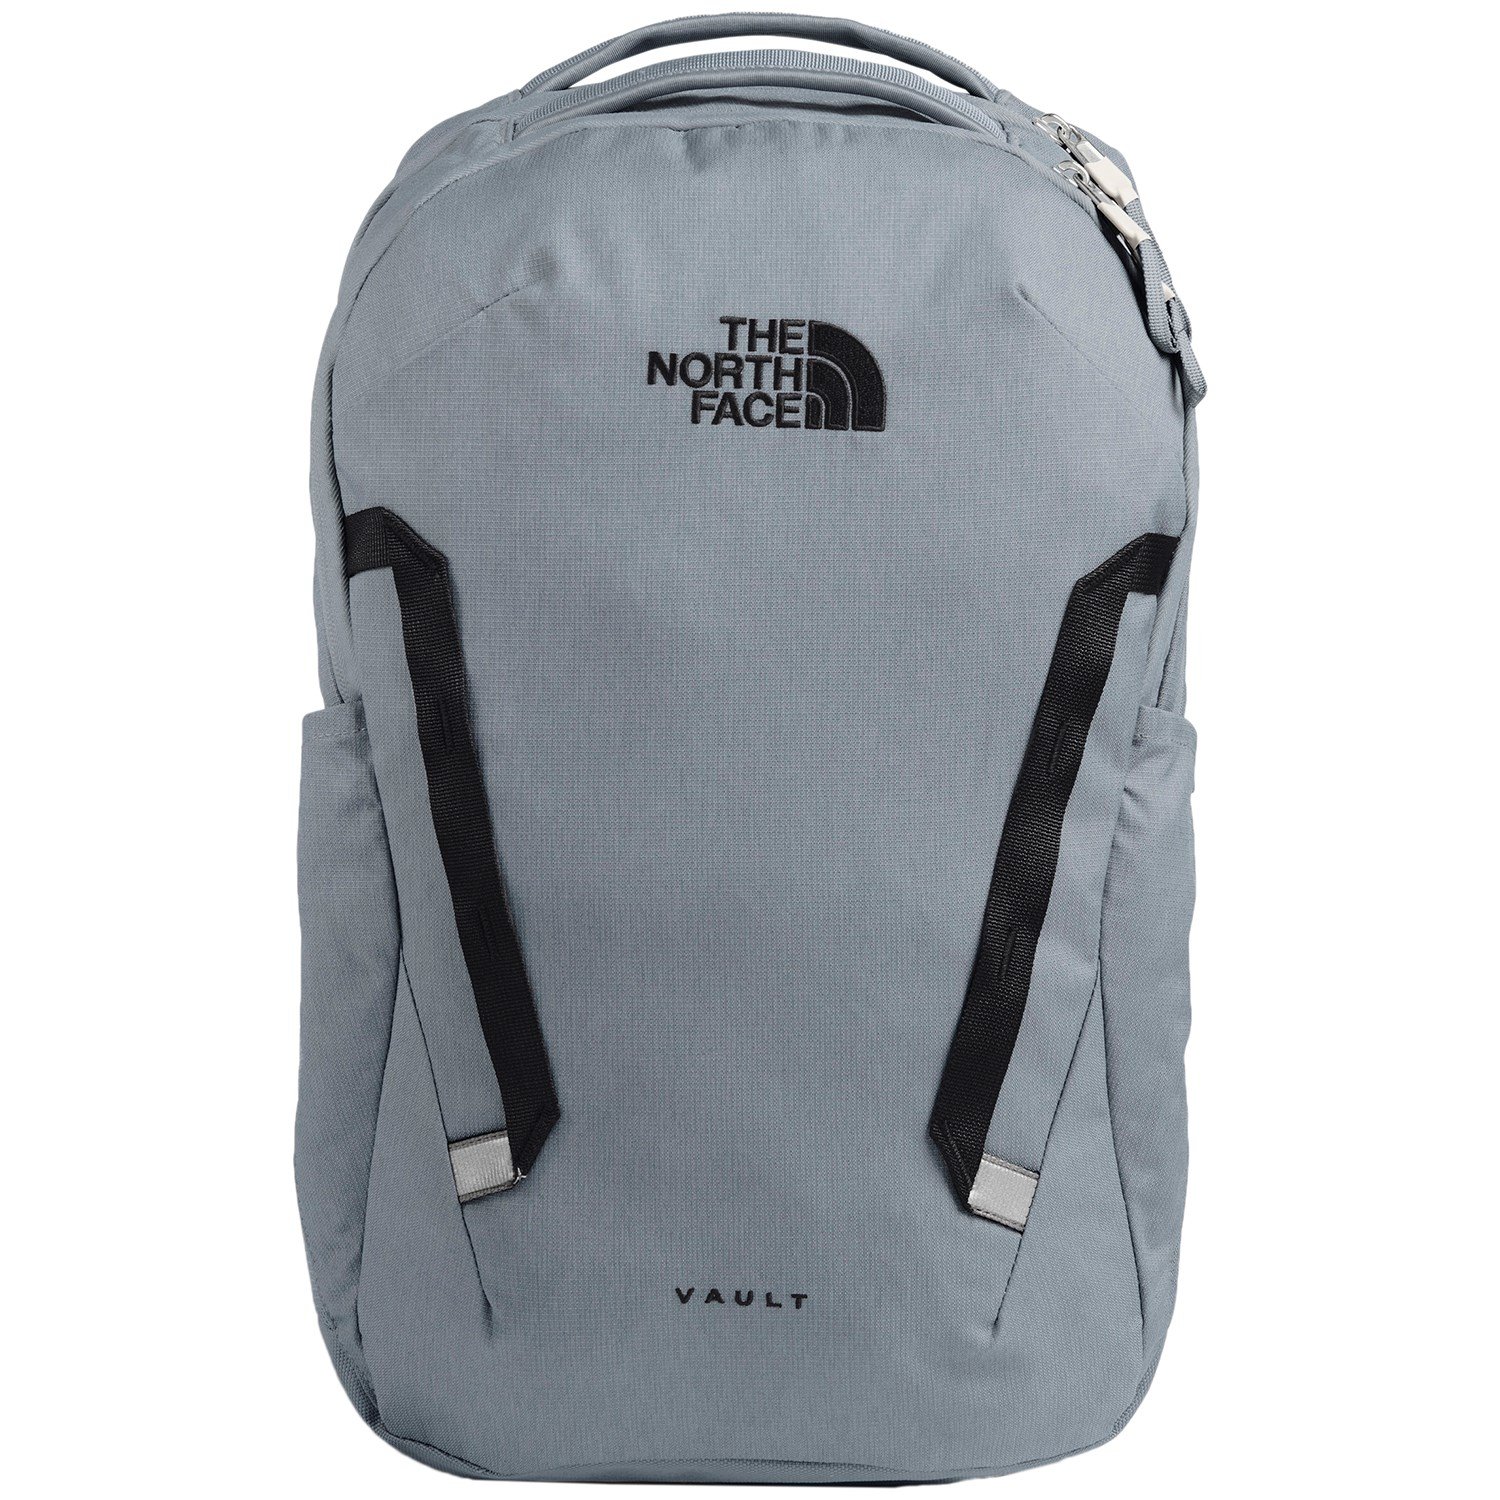 The North Face Vault Backpack | evo